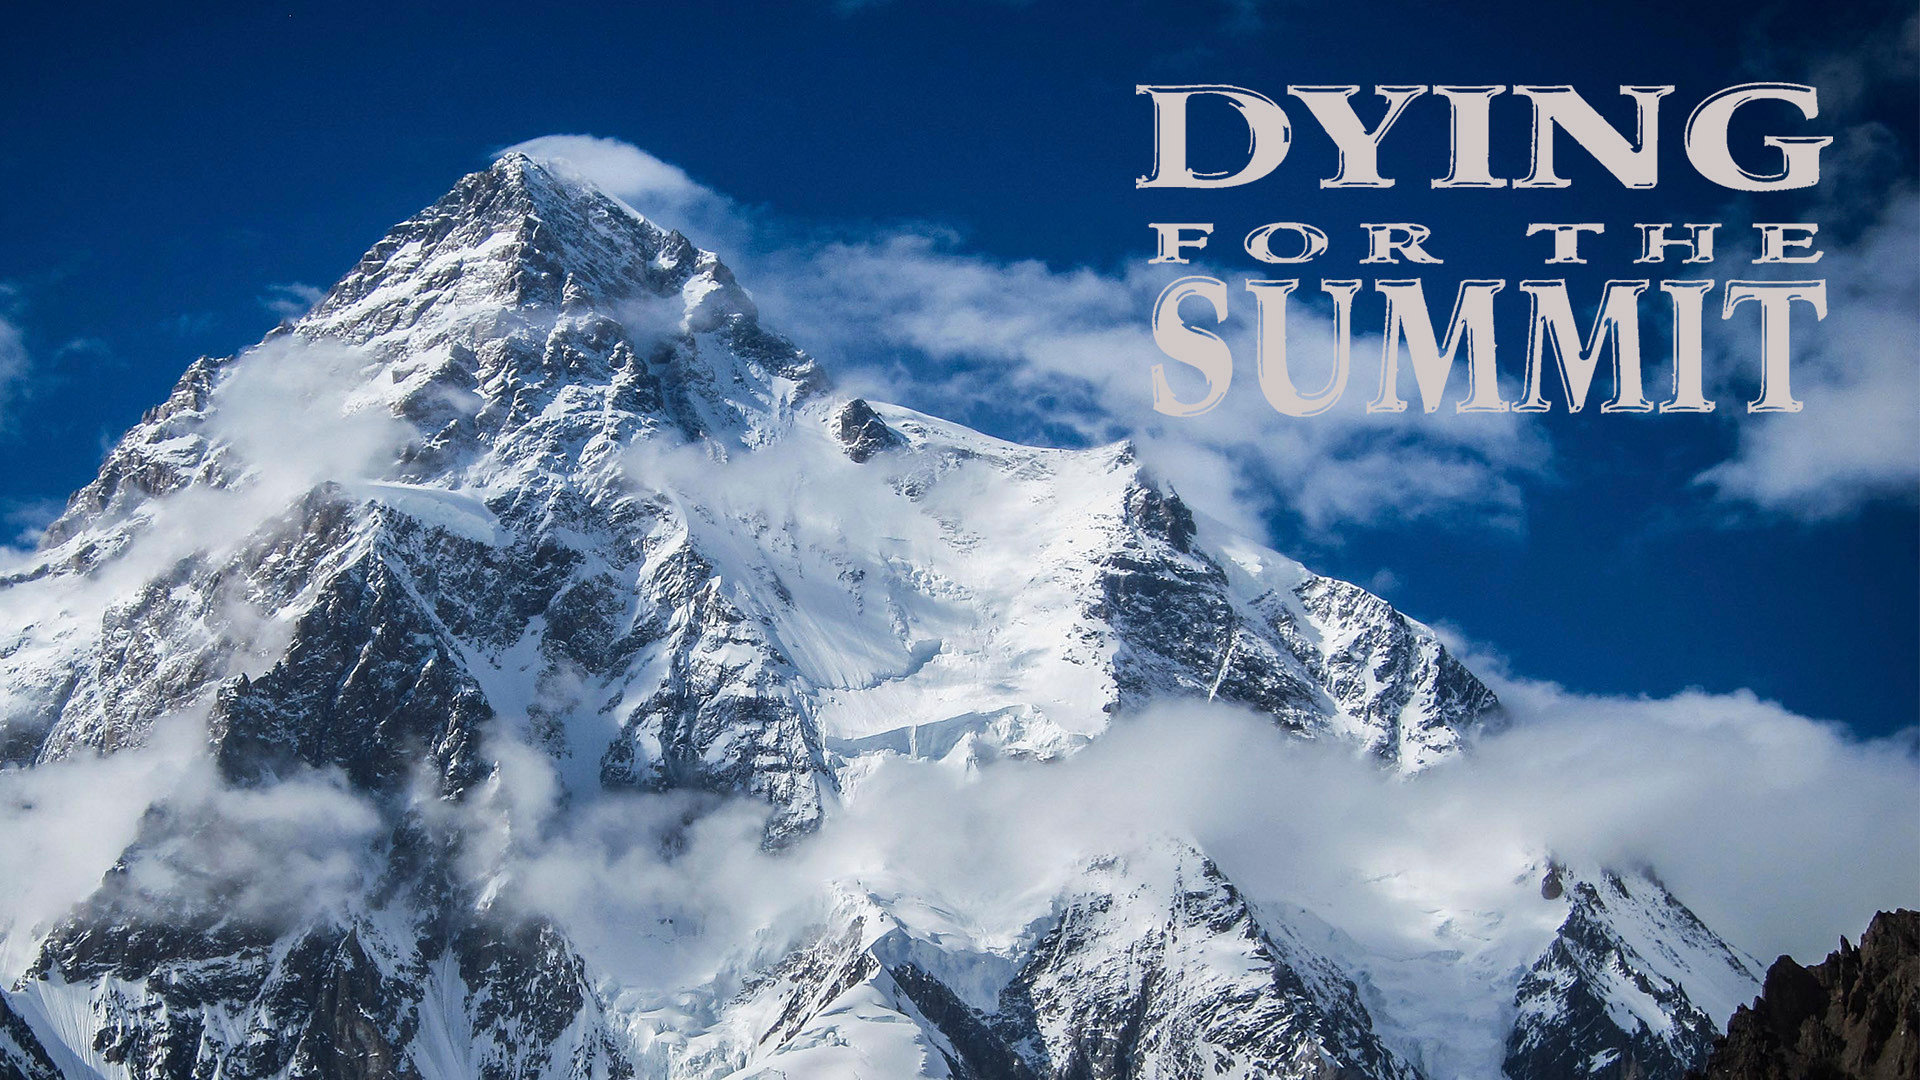 Dying for the summit